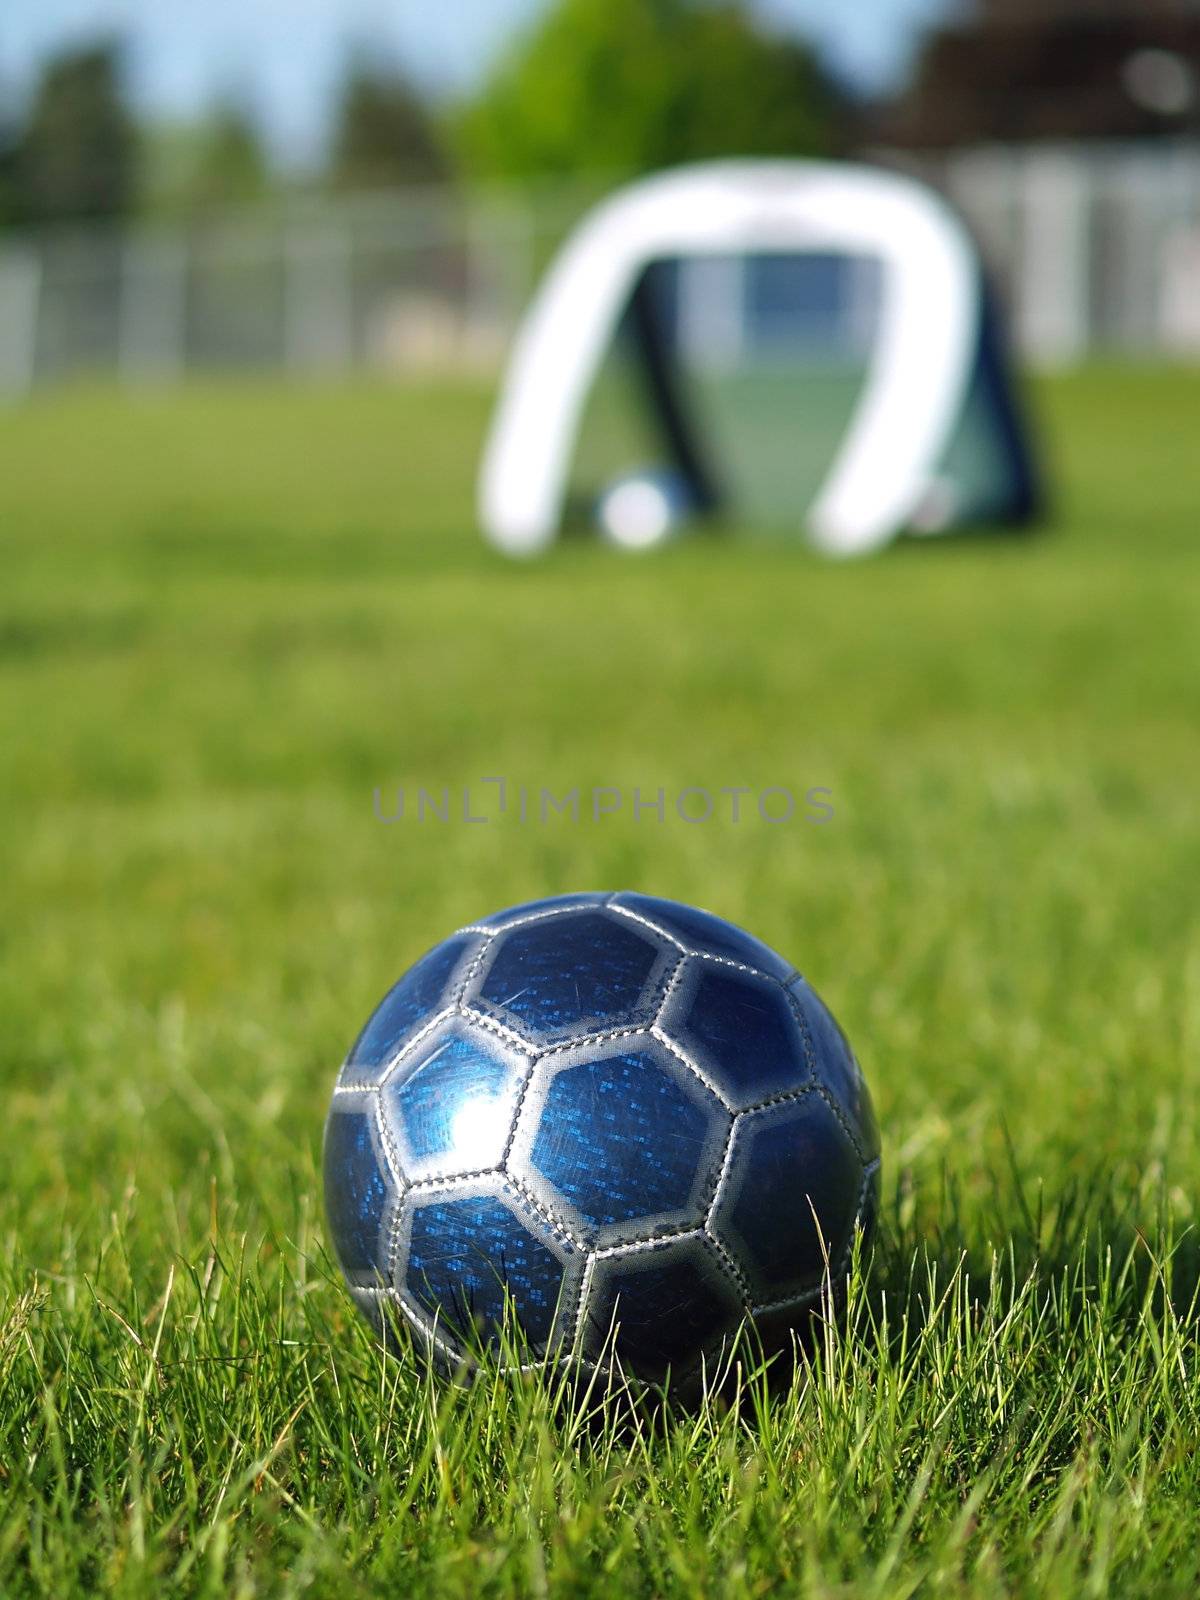 A blue soccer ball on a field of green grass on a sunny day with the goal in the background.